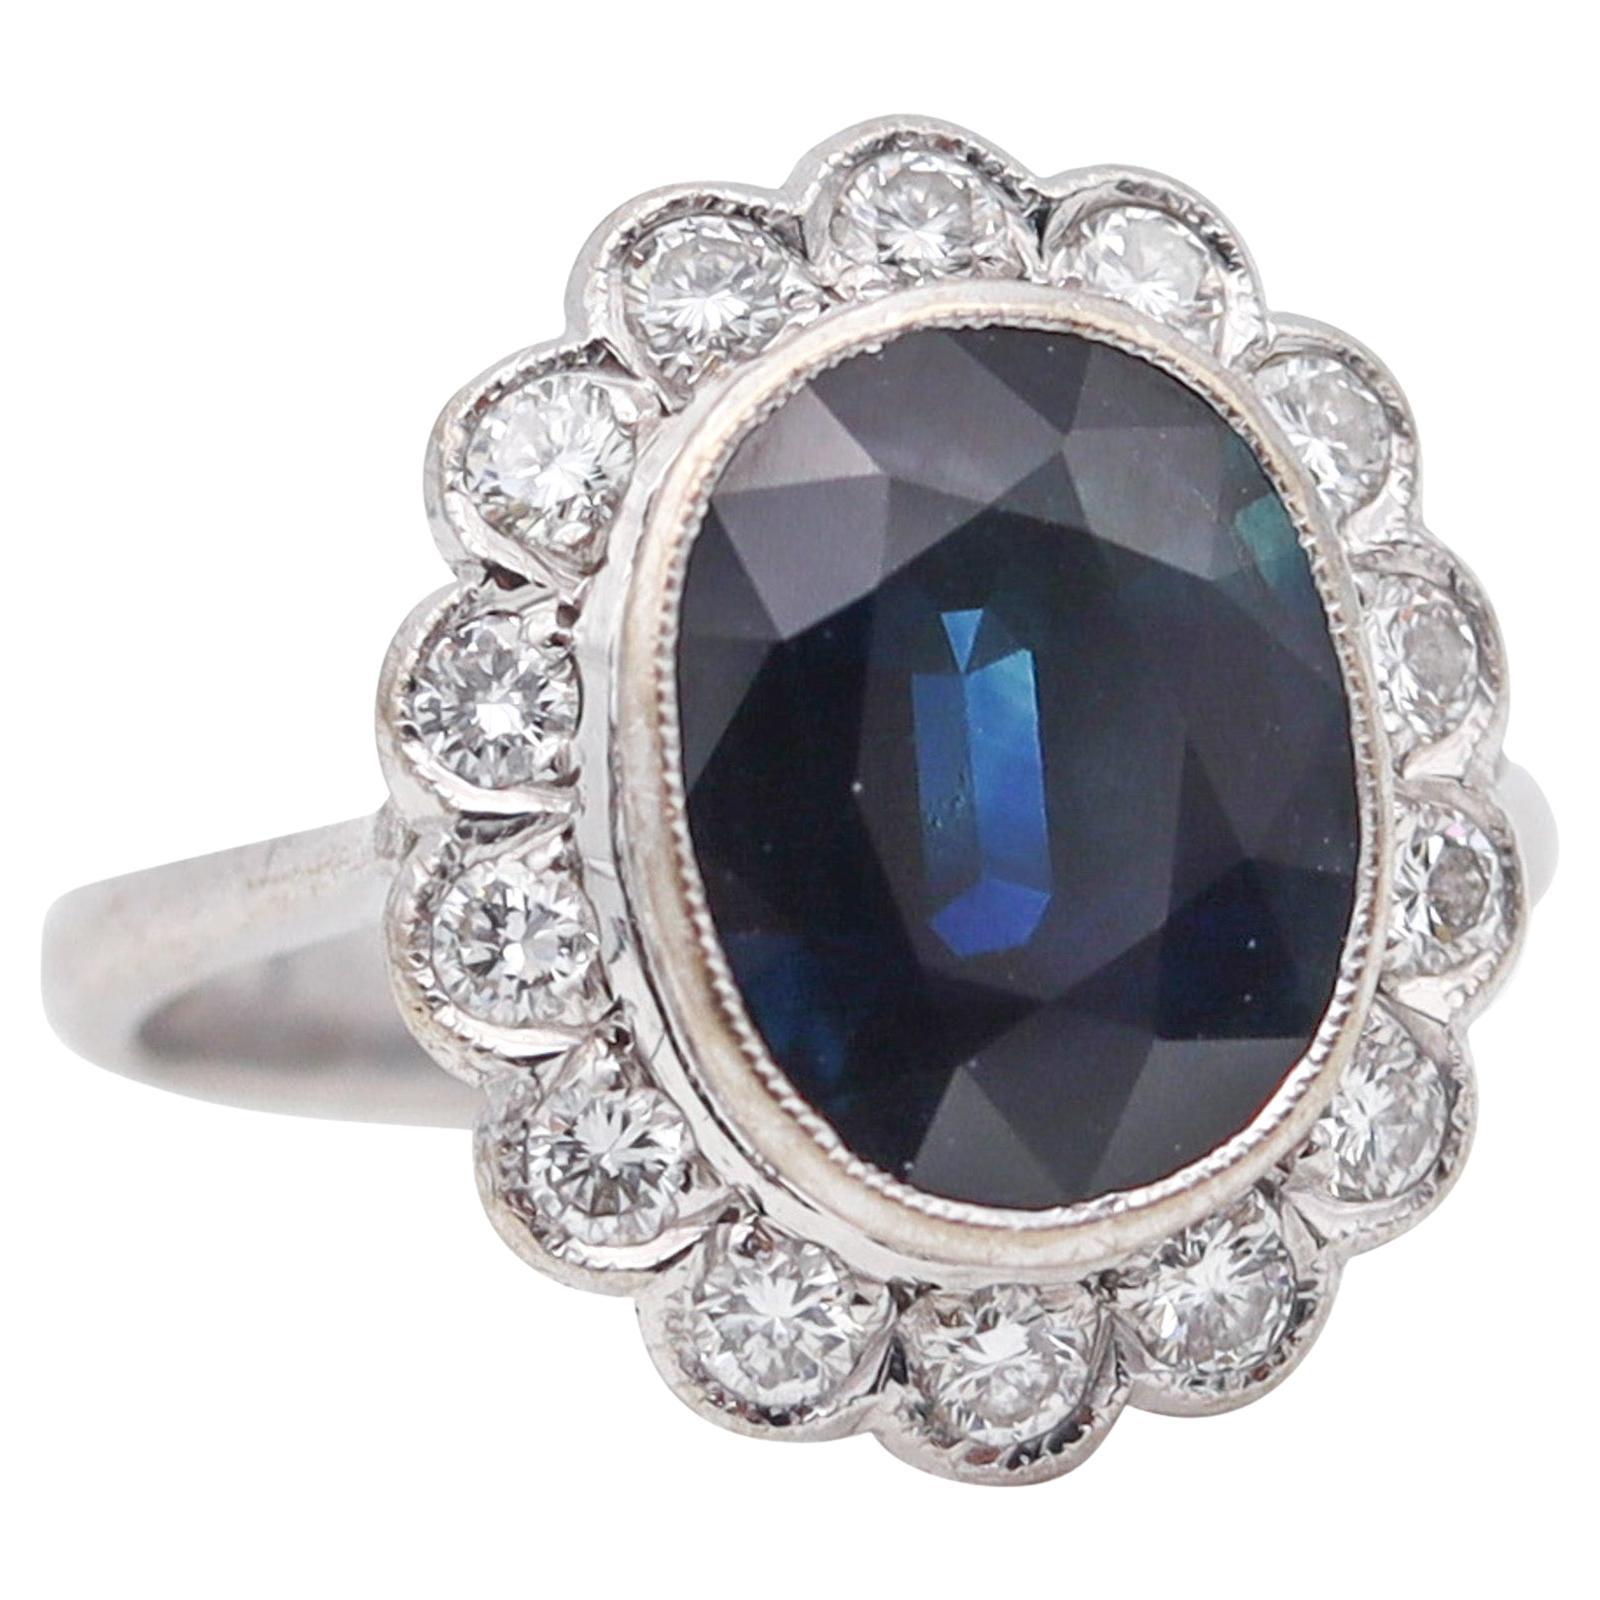 Art Deco 1930 Cocktail Ring 18Kt White Gold With 5.06 Ctw Diamonds And Sapphire For Sale